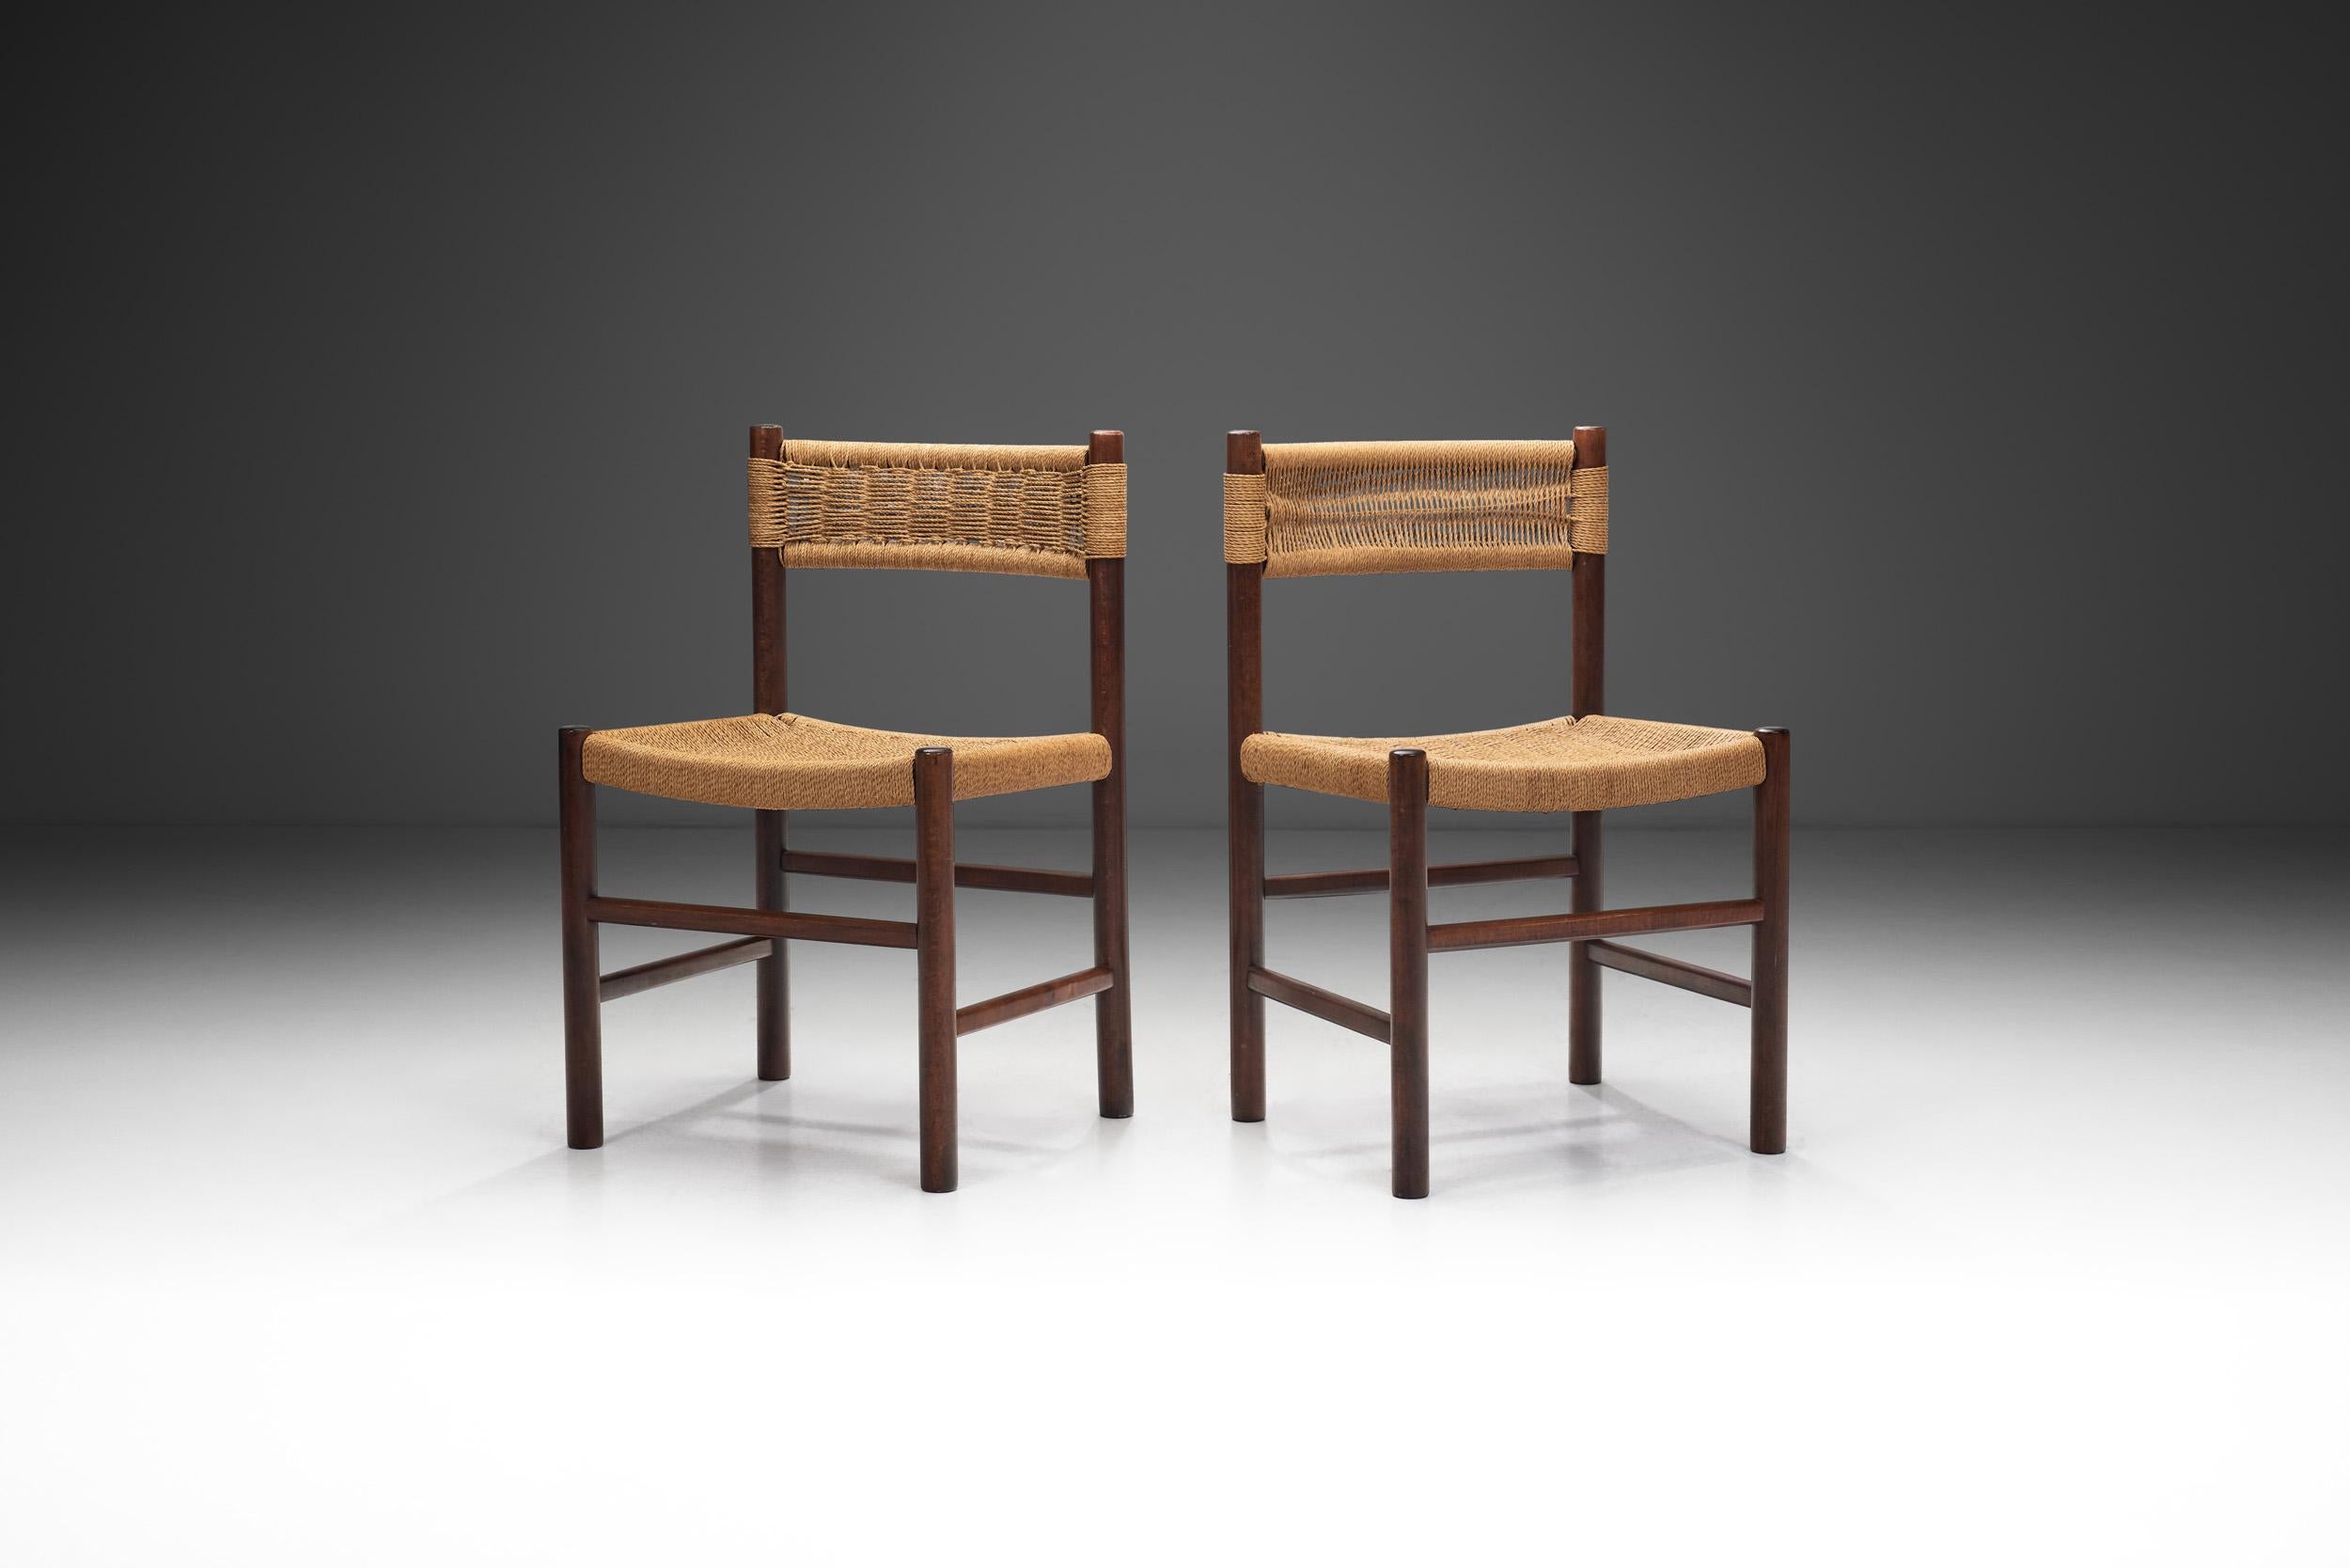 This charming pair of European dining chairs was born from a desire to create a design that was comfortable, organic, and cosy in its simplicity. The design, reminiscent of Charlotte Perriand’s famous “Dordogne” chair model, incorporates subtle, yet